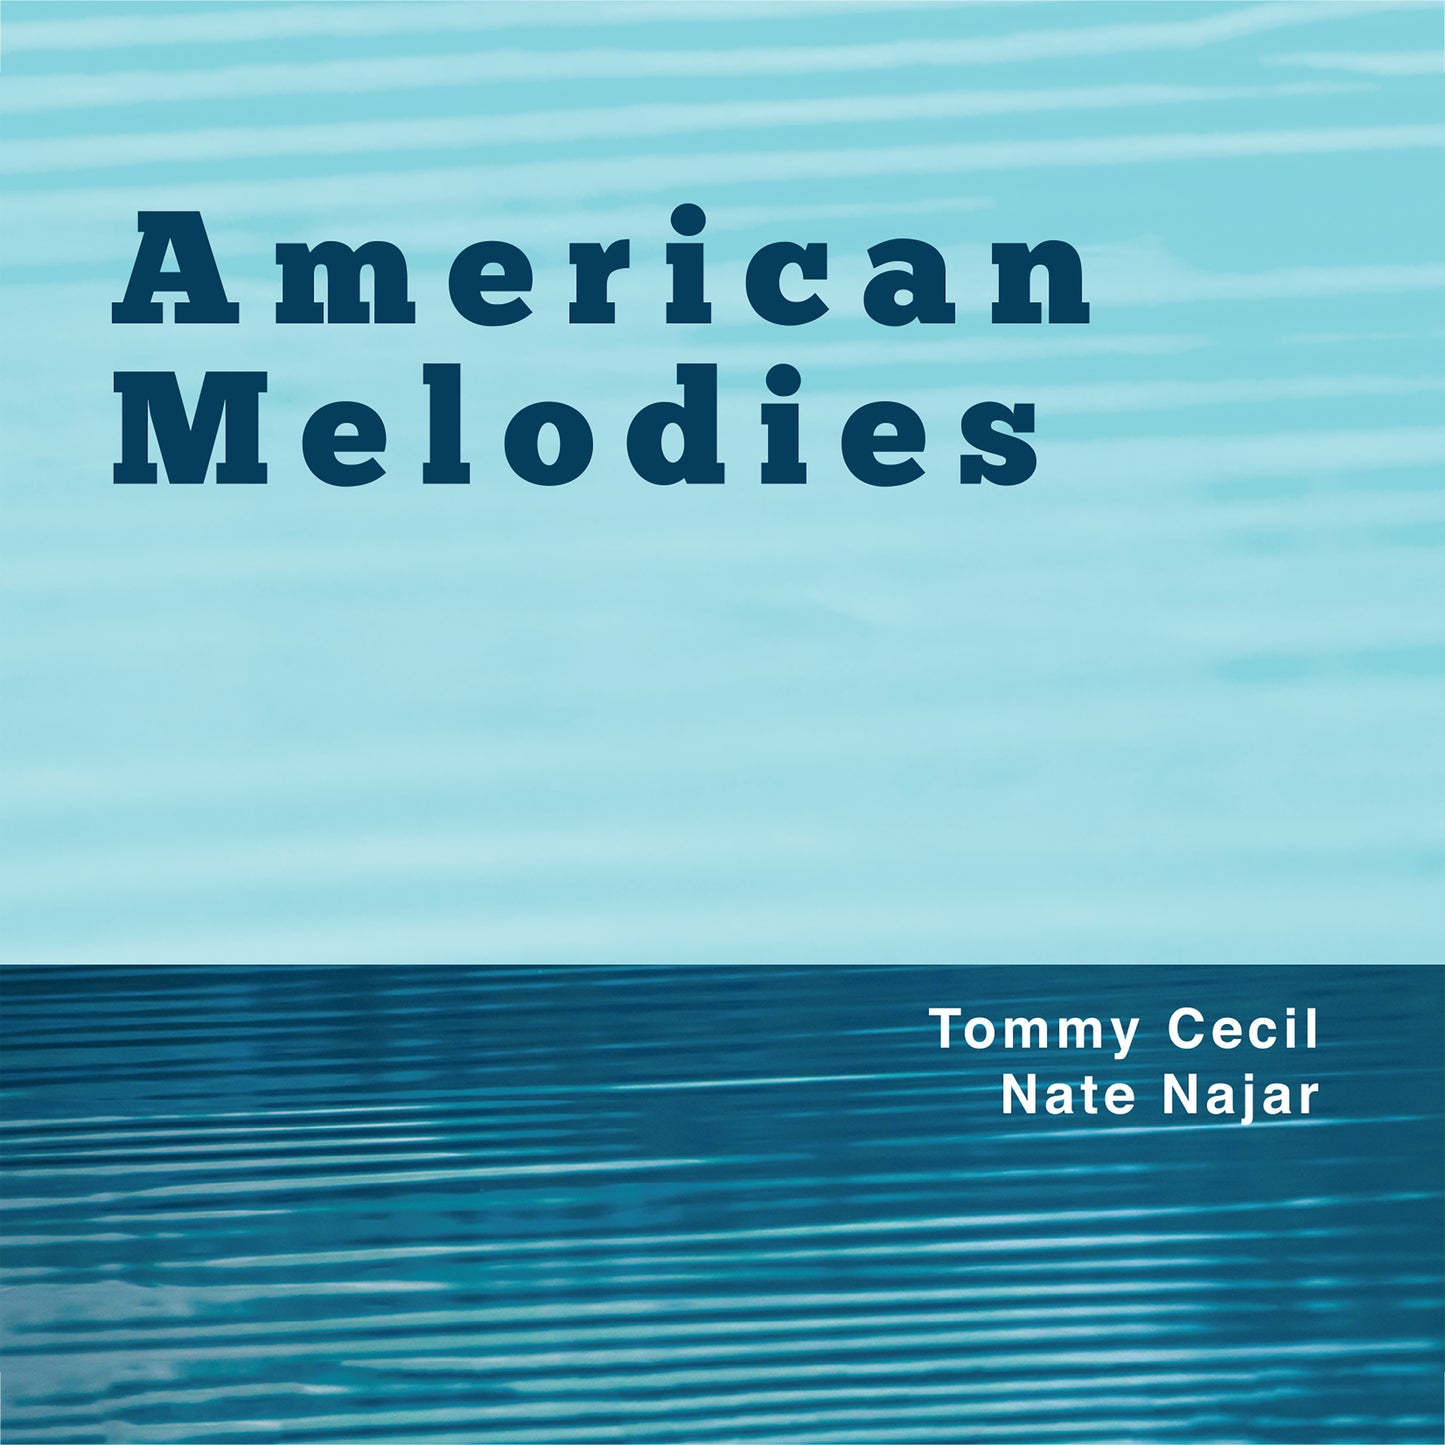 Tommy Cecil and Nate Najar "American Melodies" CD